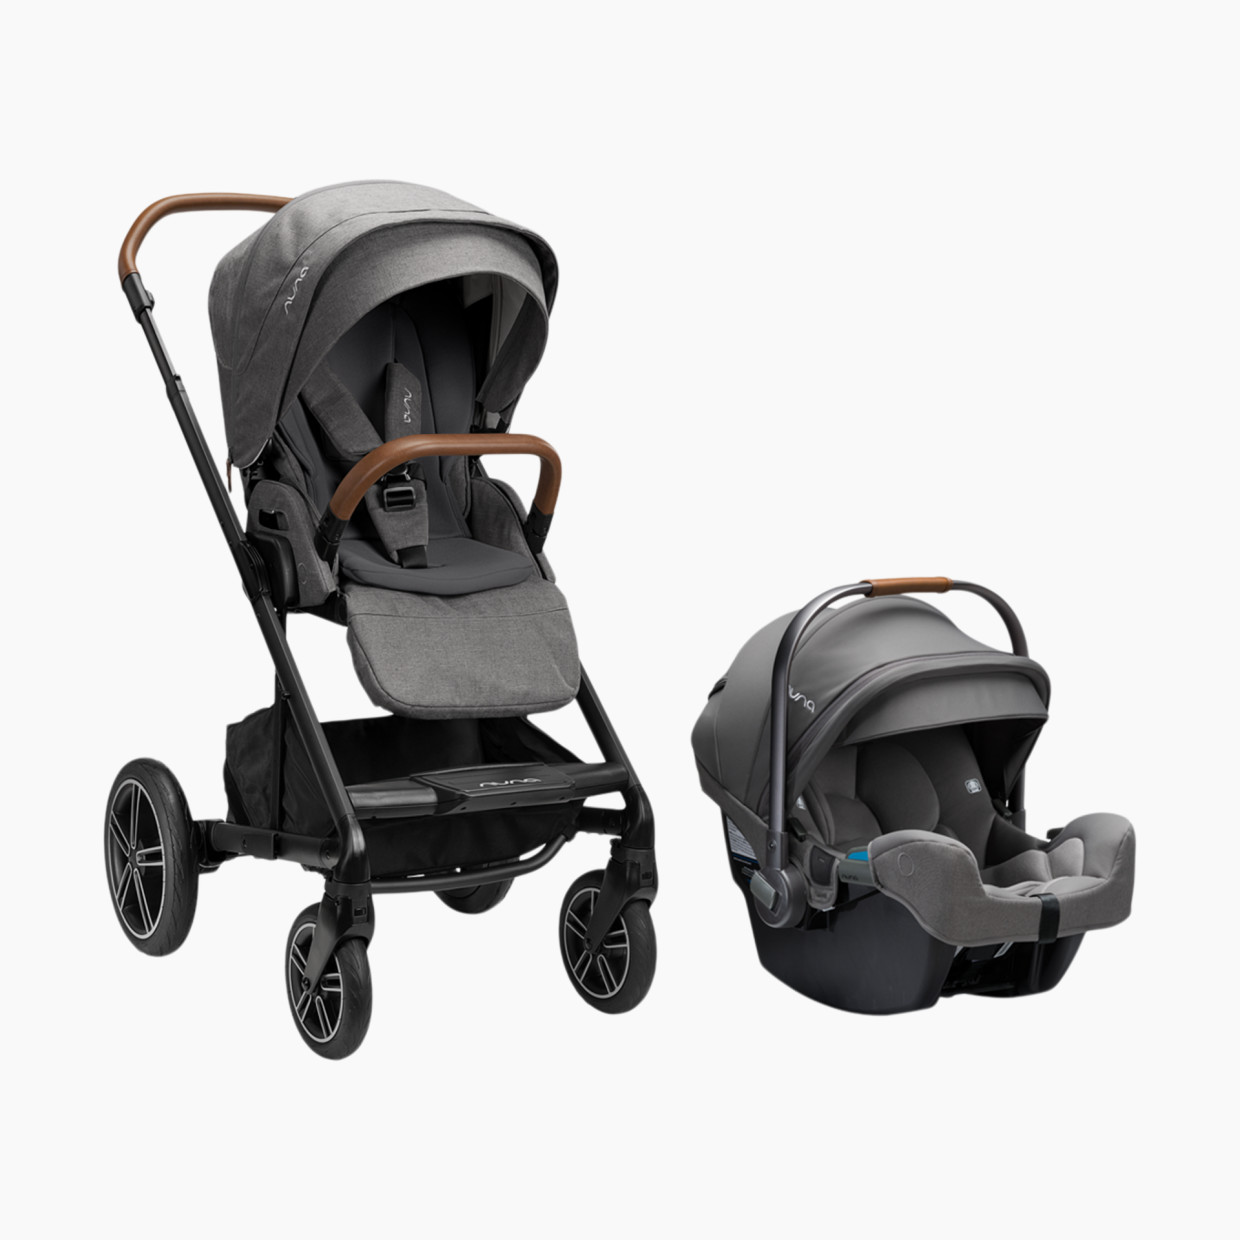 Nuna MIXX Next with Mag Buckle and PIPA Rx Travel System - Granite.